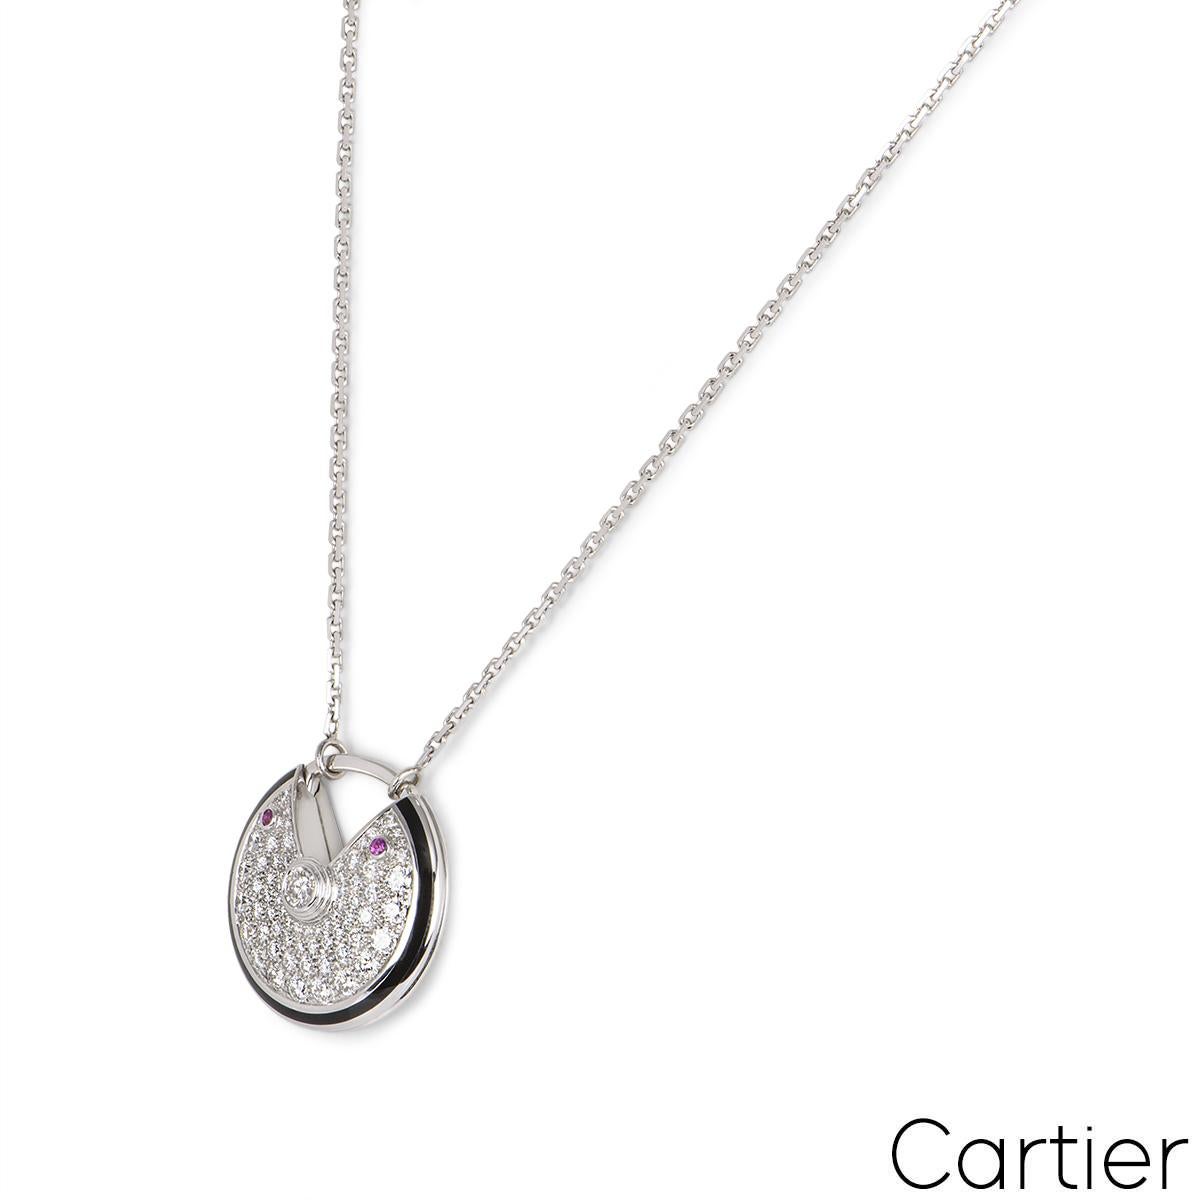 A beautiful 18k white gold diamond necklace by Cartier from the Amulette de Cartier collection. The circular talisman motif has a single round brilliant cut diamond set to the centre in a rubover setting weighing 0.15ct, surrounded by a further 70